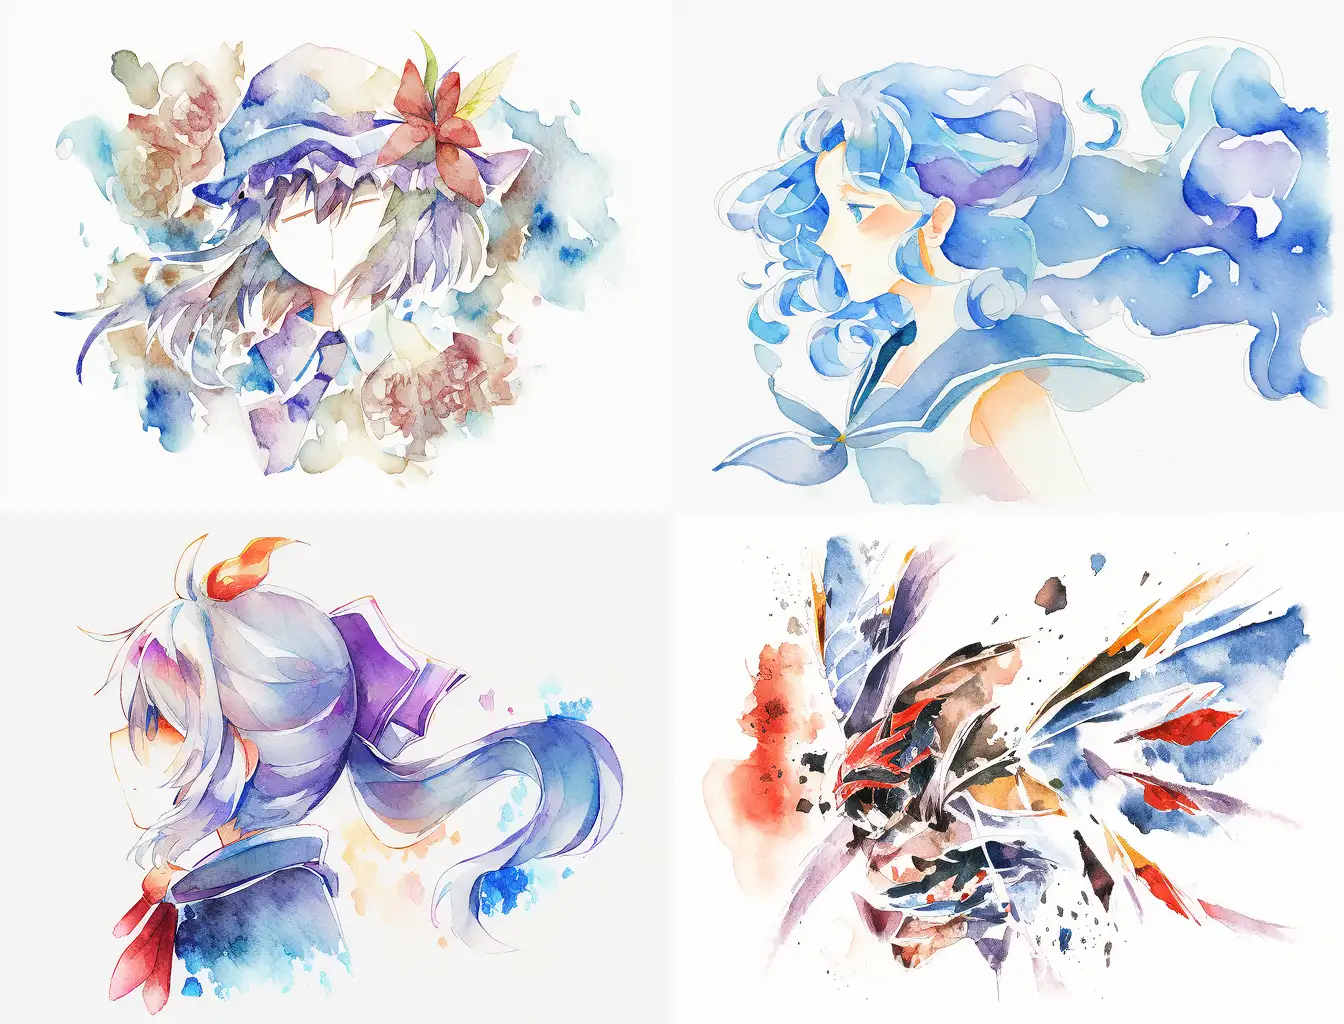 Colorful-Watercolor-Illustration-with-Niji-4-Elements-in-a-43-Aspect-Ratio